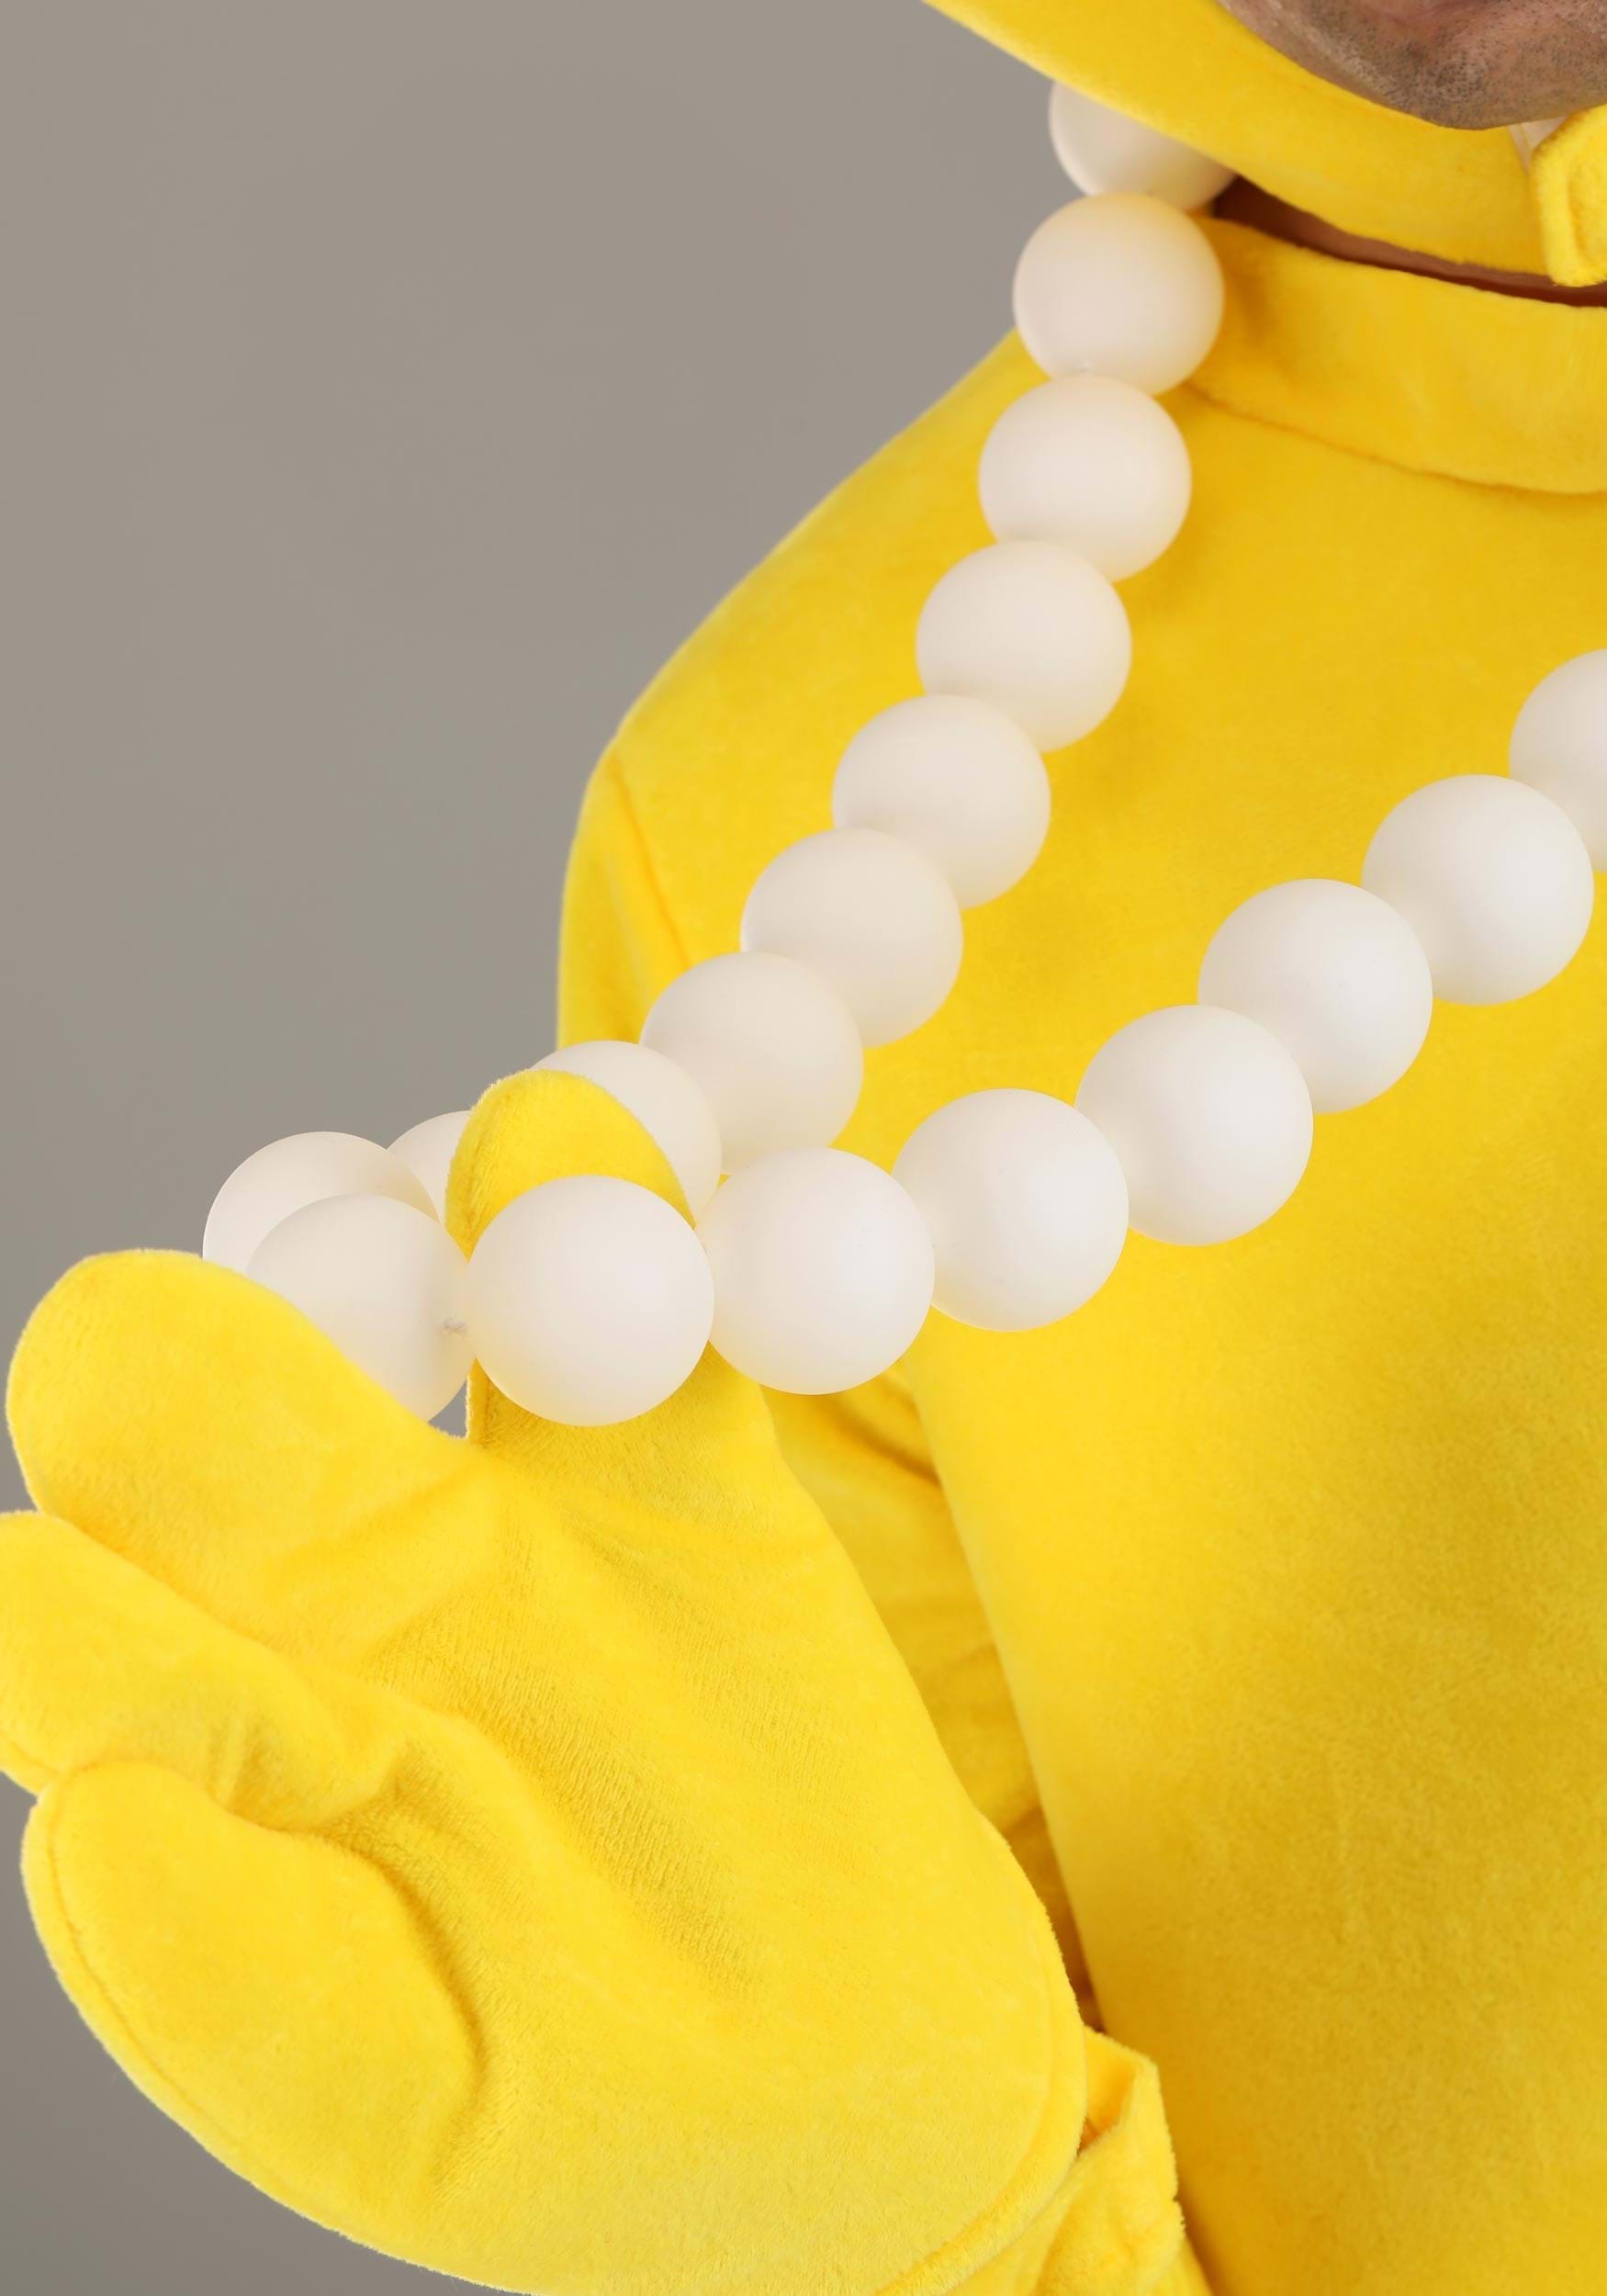 Yellow Hungry Hungry Hippos Adult Costume